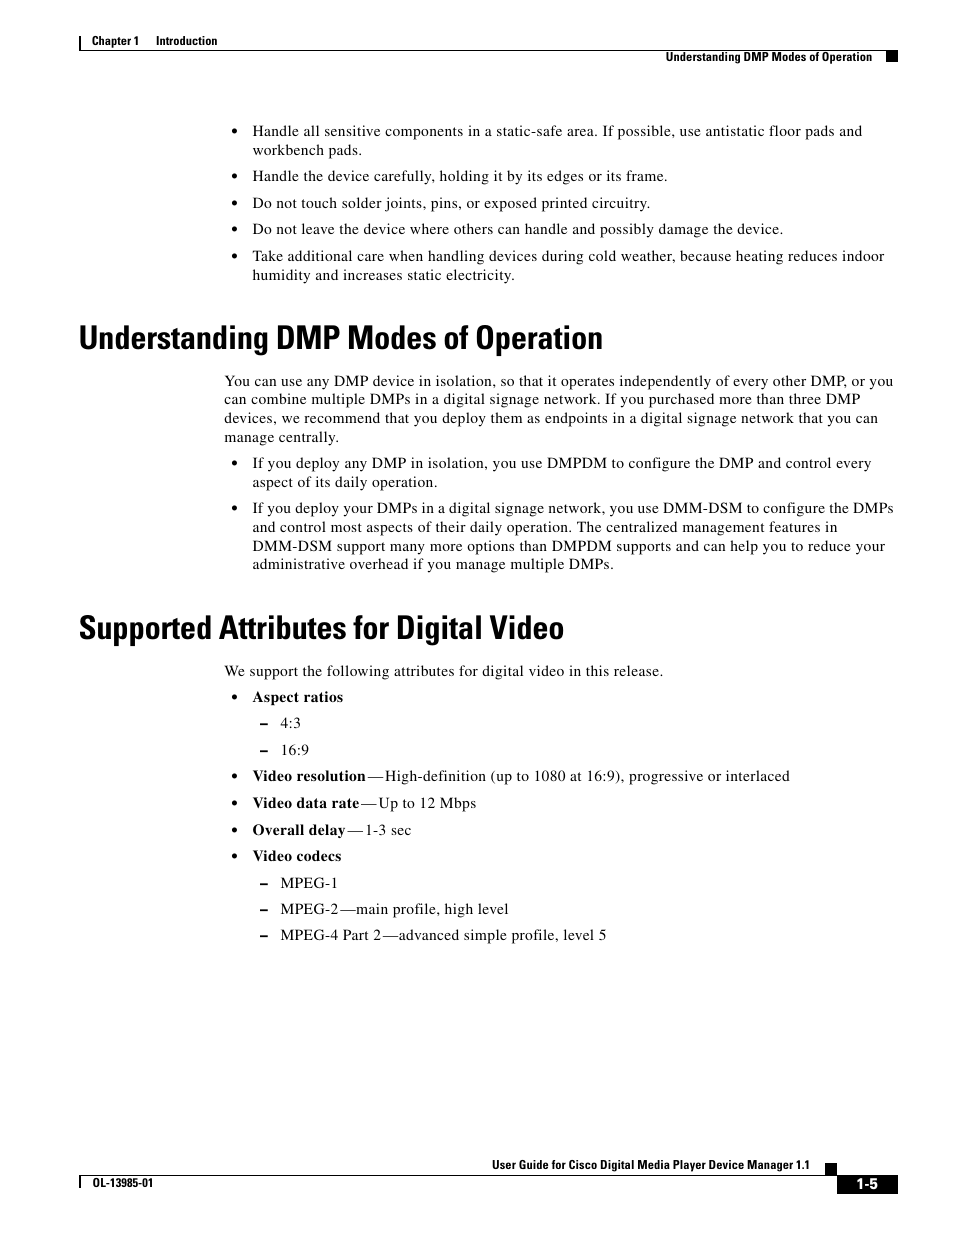 Understanding dmp modes of operation, Supported attributes for digital video | Cisco OL-13985-01 User Manual | Page 5 / 10